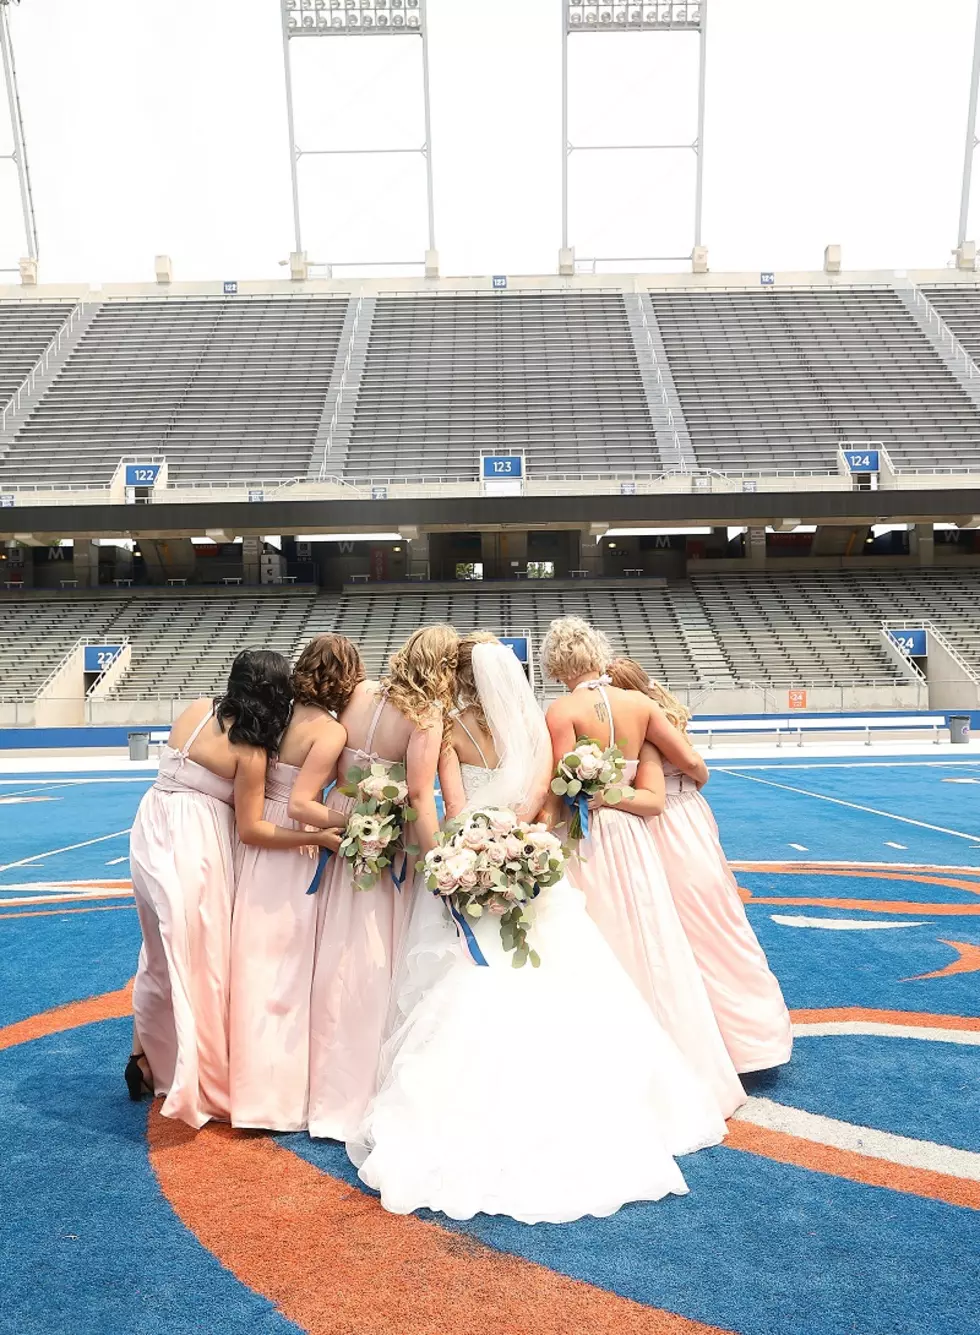 The Worst Days to Get Married in Boise